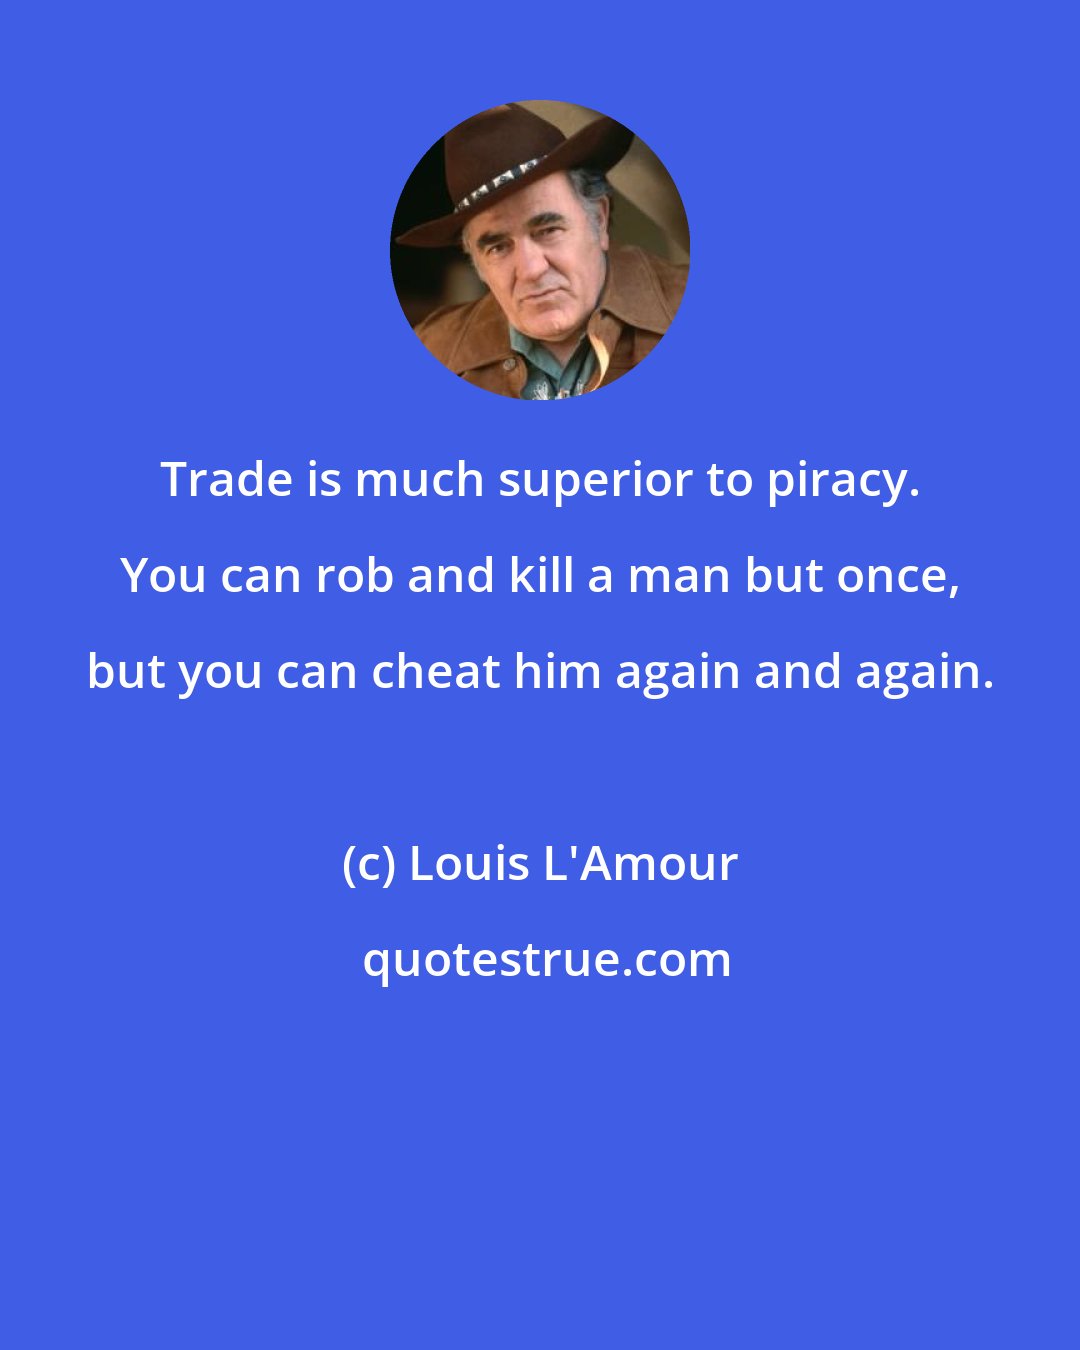 Louis L'Amour: Trade is much superior to piracy. You can rob and kill a man but once, but you can cheat him again and again.